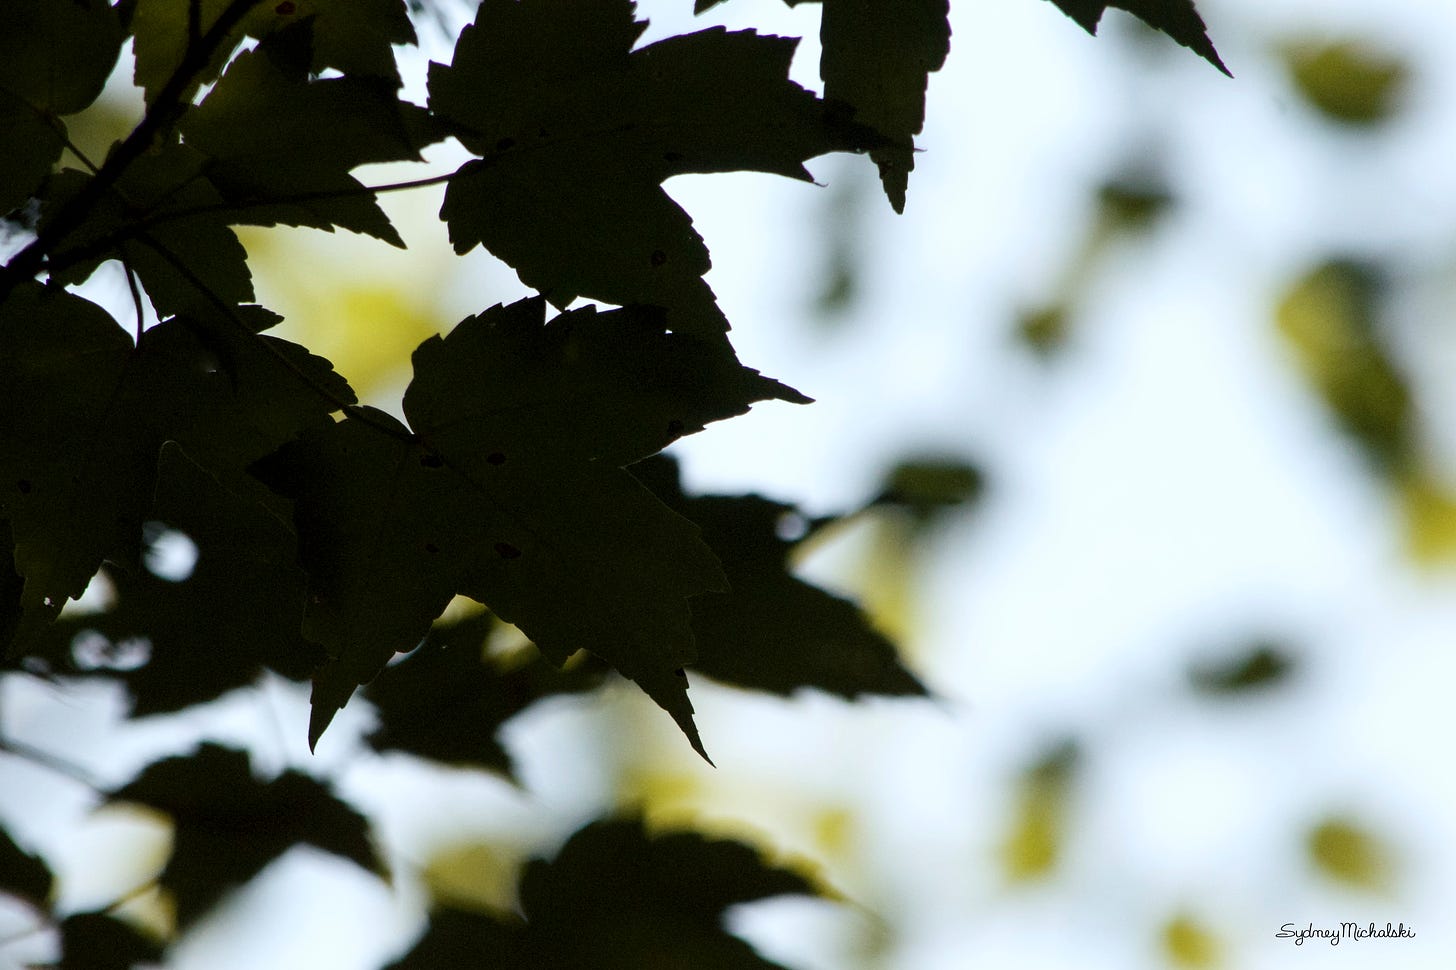 Shadowy maple leaves are silhouetted against a canopy of dappled bright leaves and blue sky.